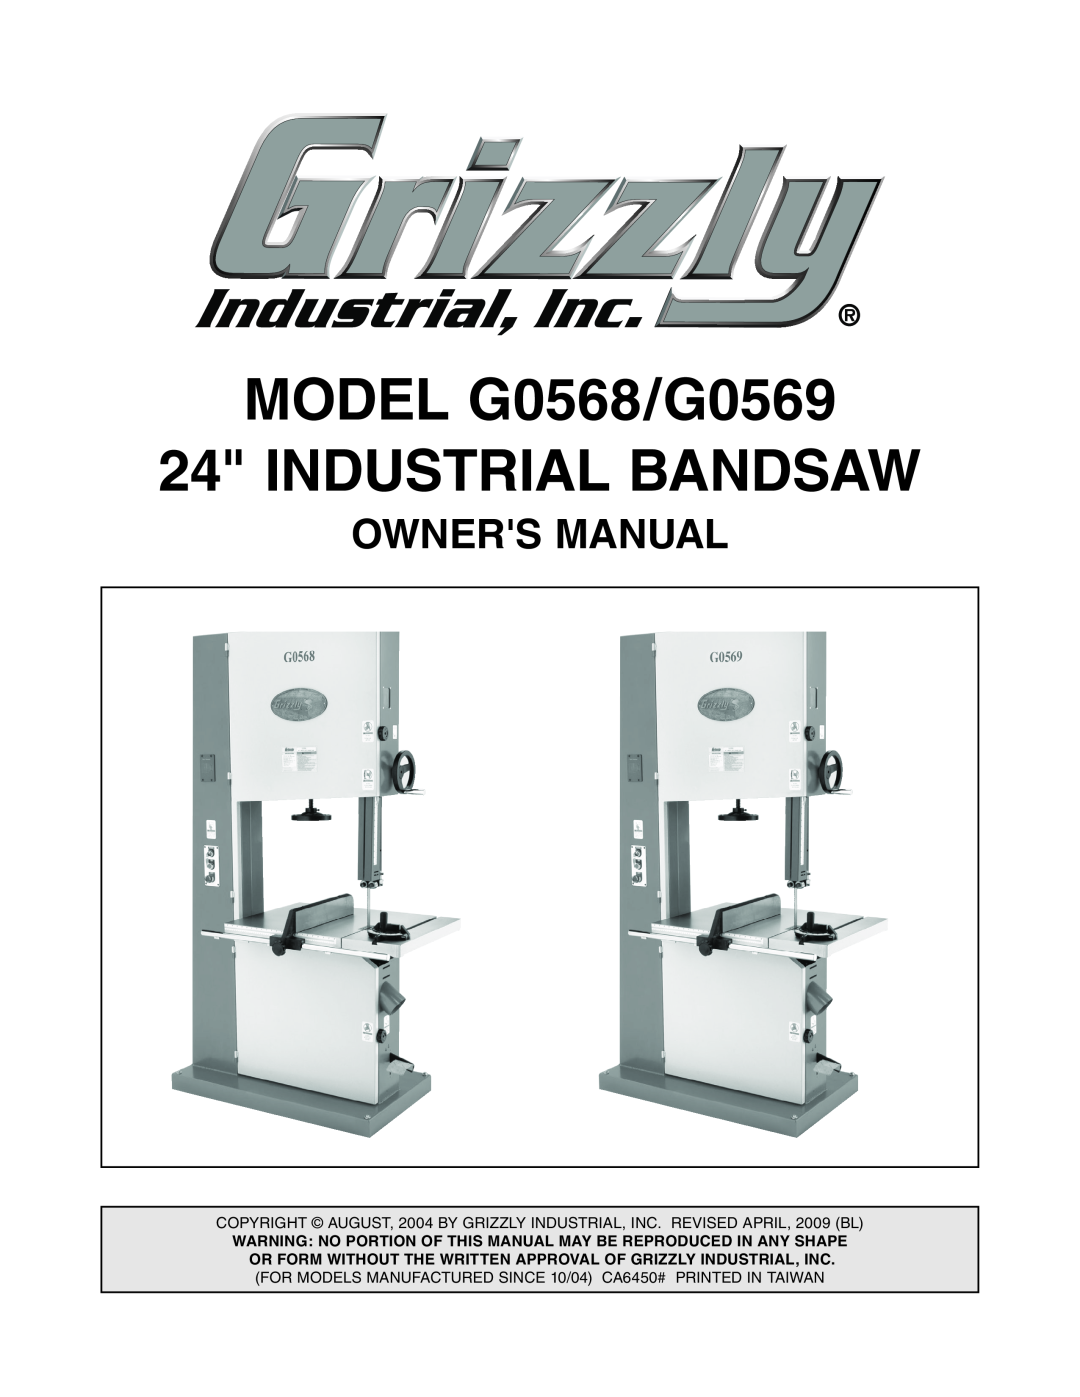 Grizzly owner manual Owners Manual, MODEL G0568/G0569 24 INDUSTRIAL BANDSAW 